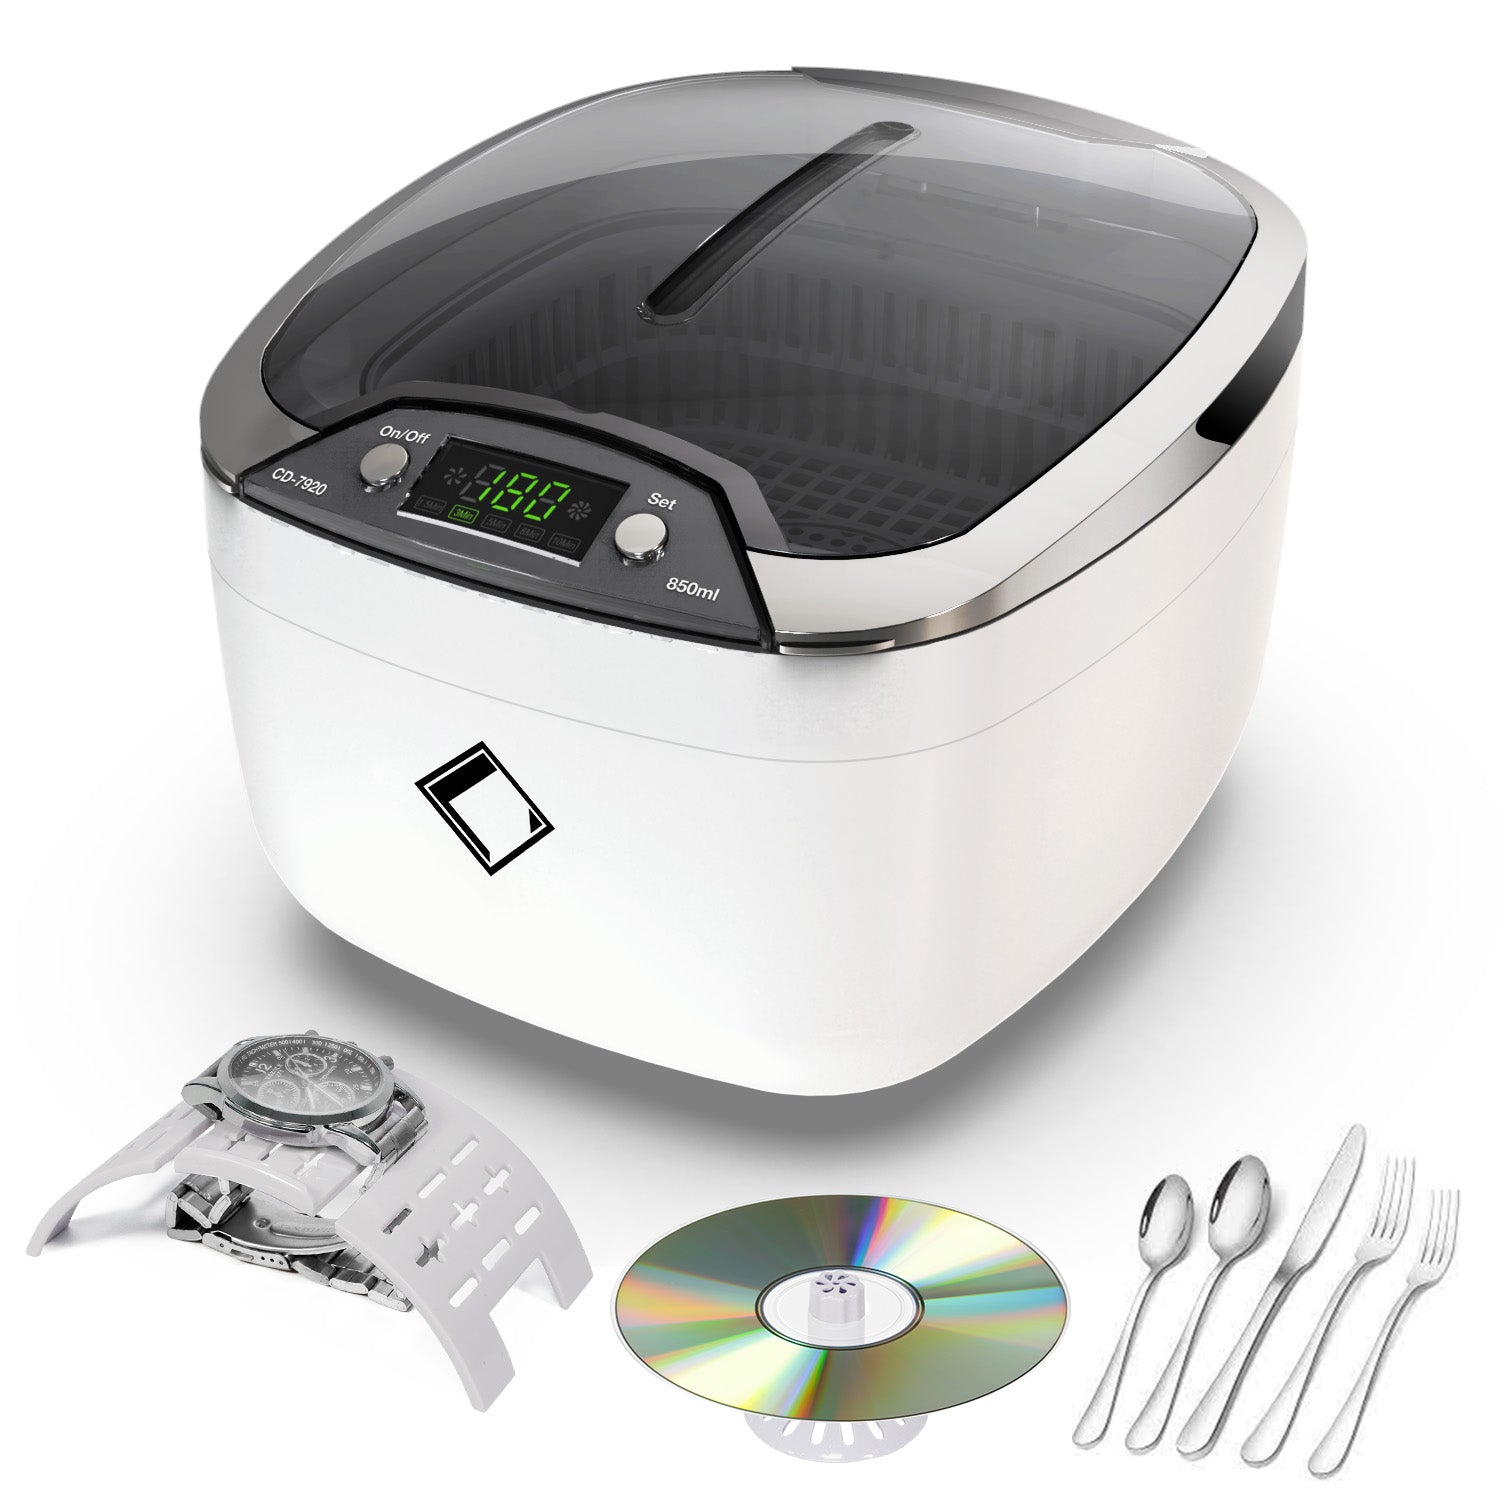 LifeBasis CD-7920 Ultrasonic Jewelry Cleaner 850ml LCD Screen with 5 D